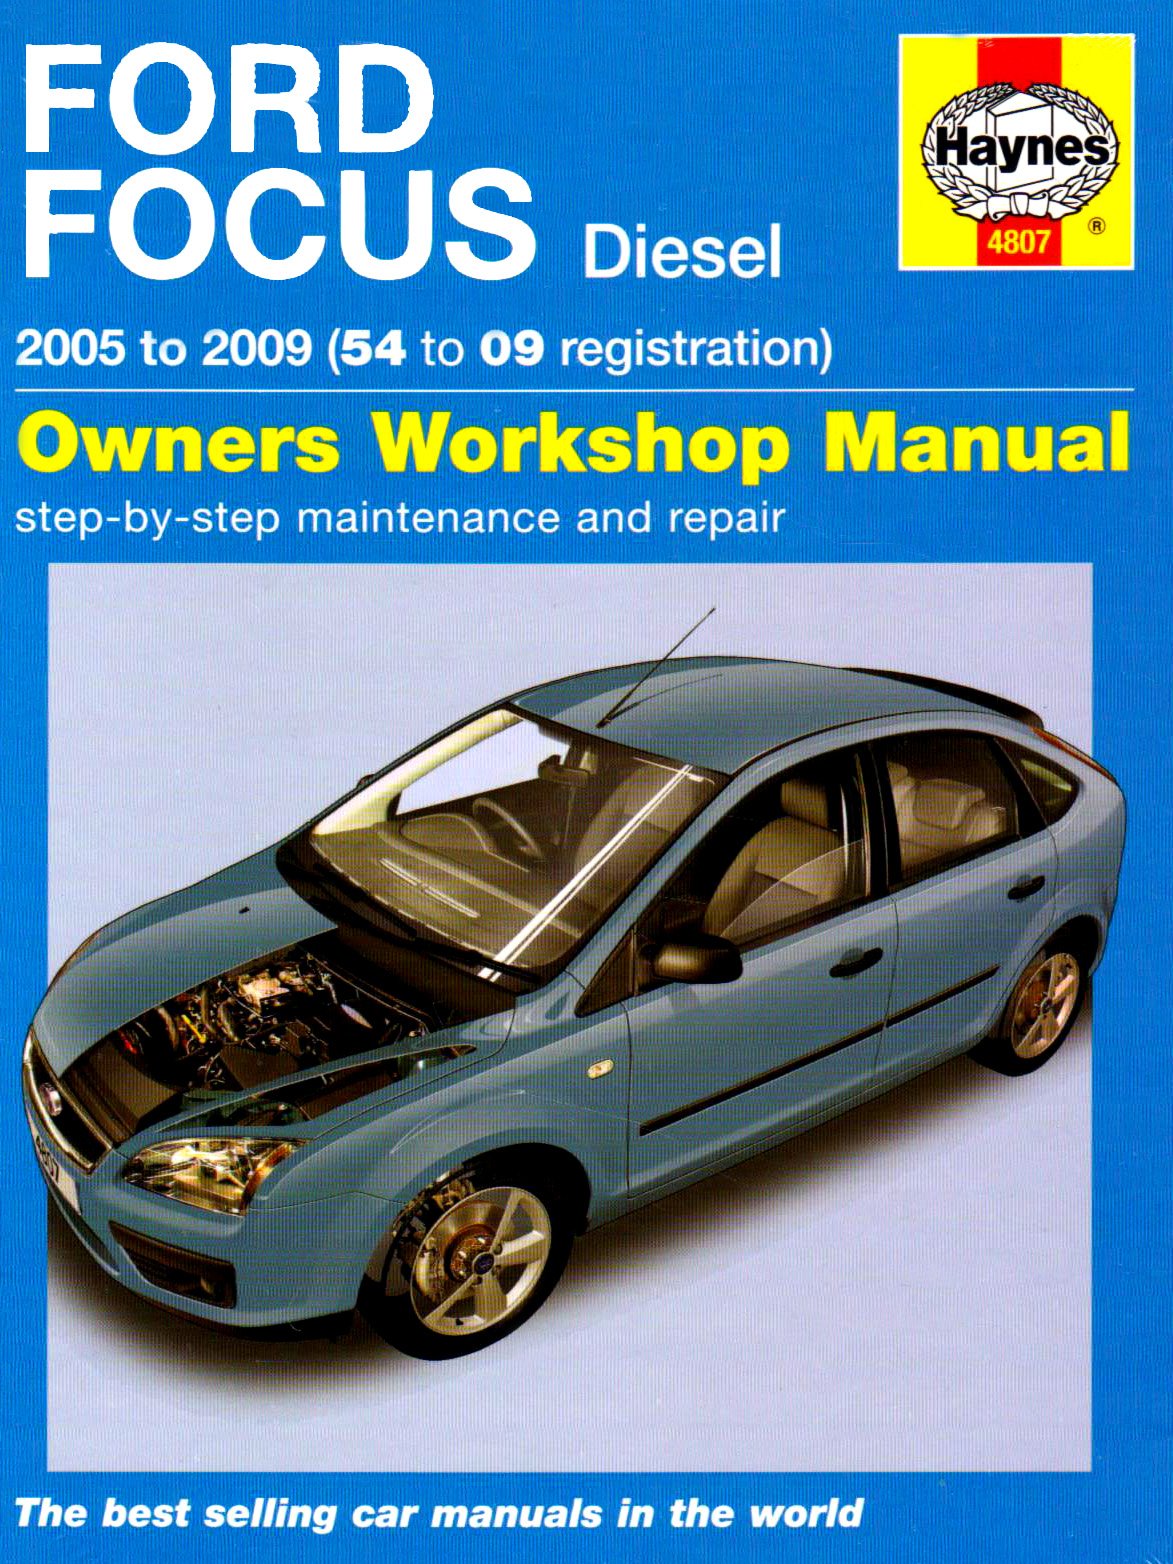 Ford focus service manual download